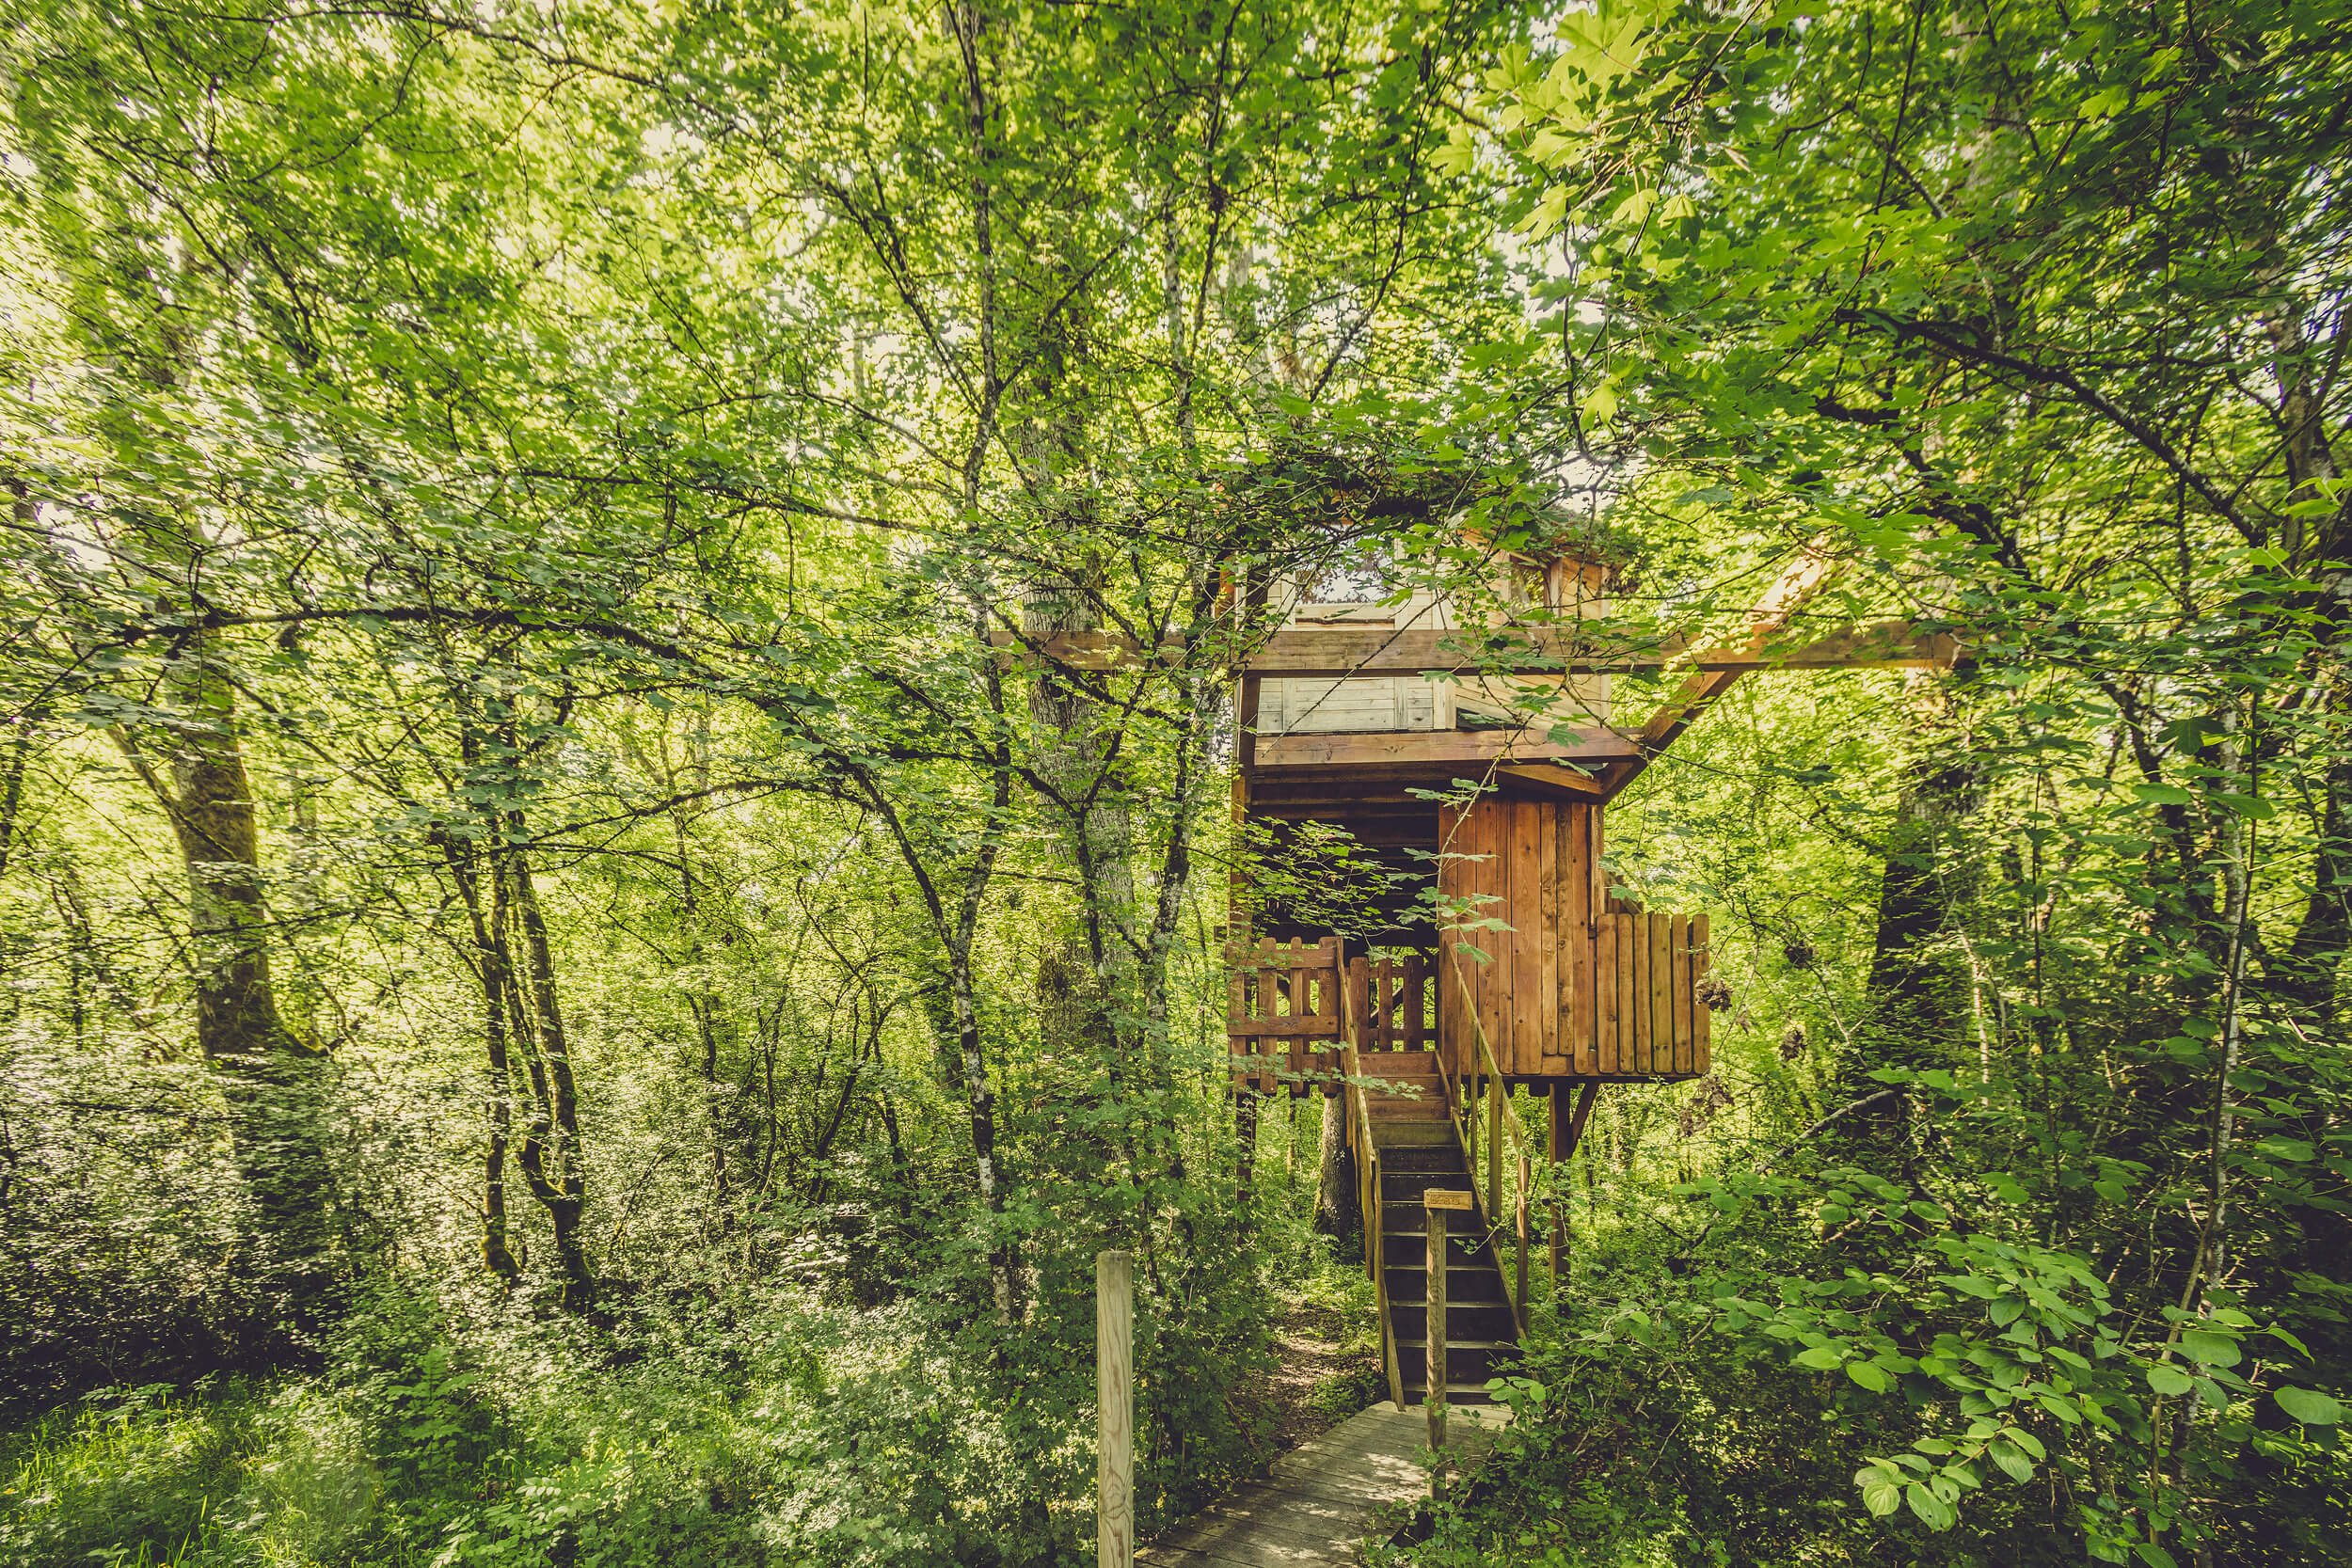 Escape to the forest- a look inside Basoa Suites' treehouses by MuruStudios advertising photographers in Madrid Barcelona Pamplona Spain 18.jpg